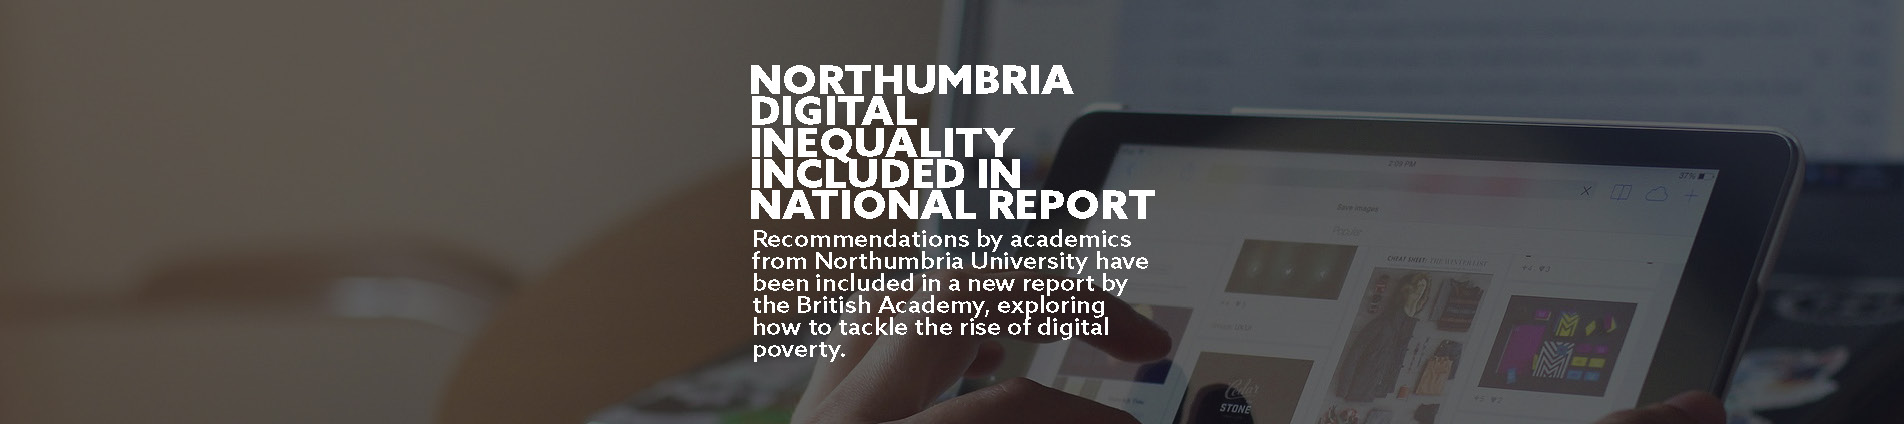 Northumbria digital inequality included in national report